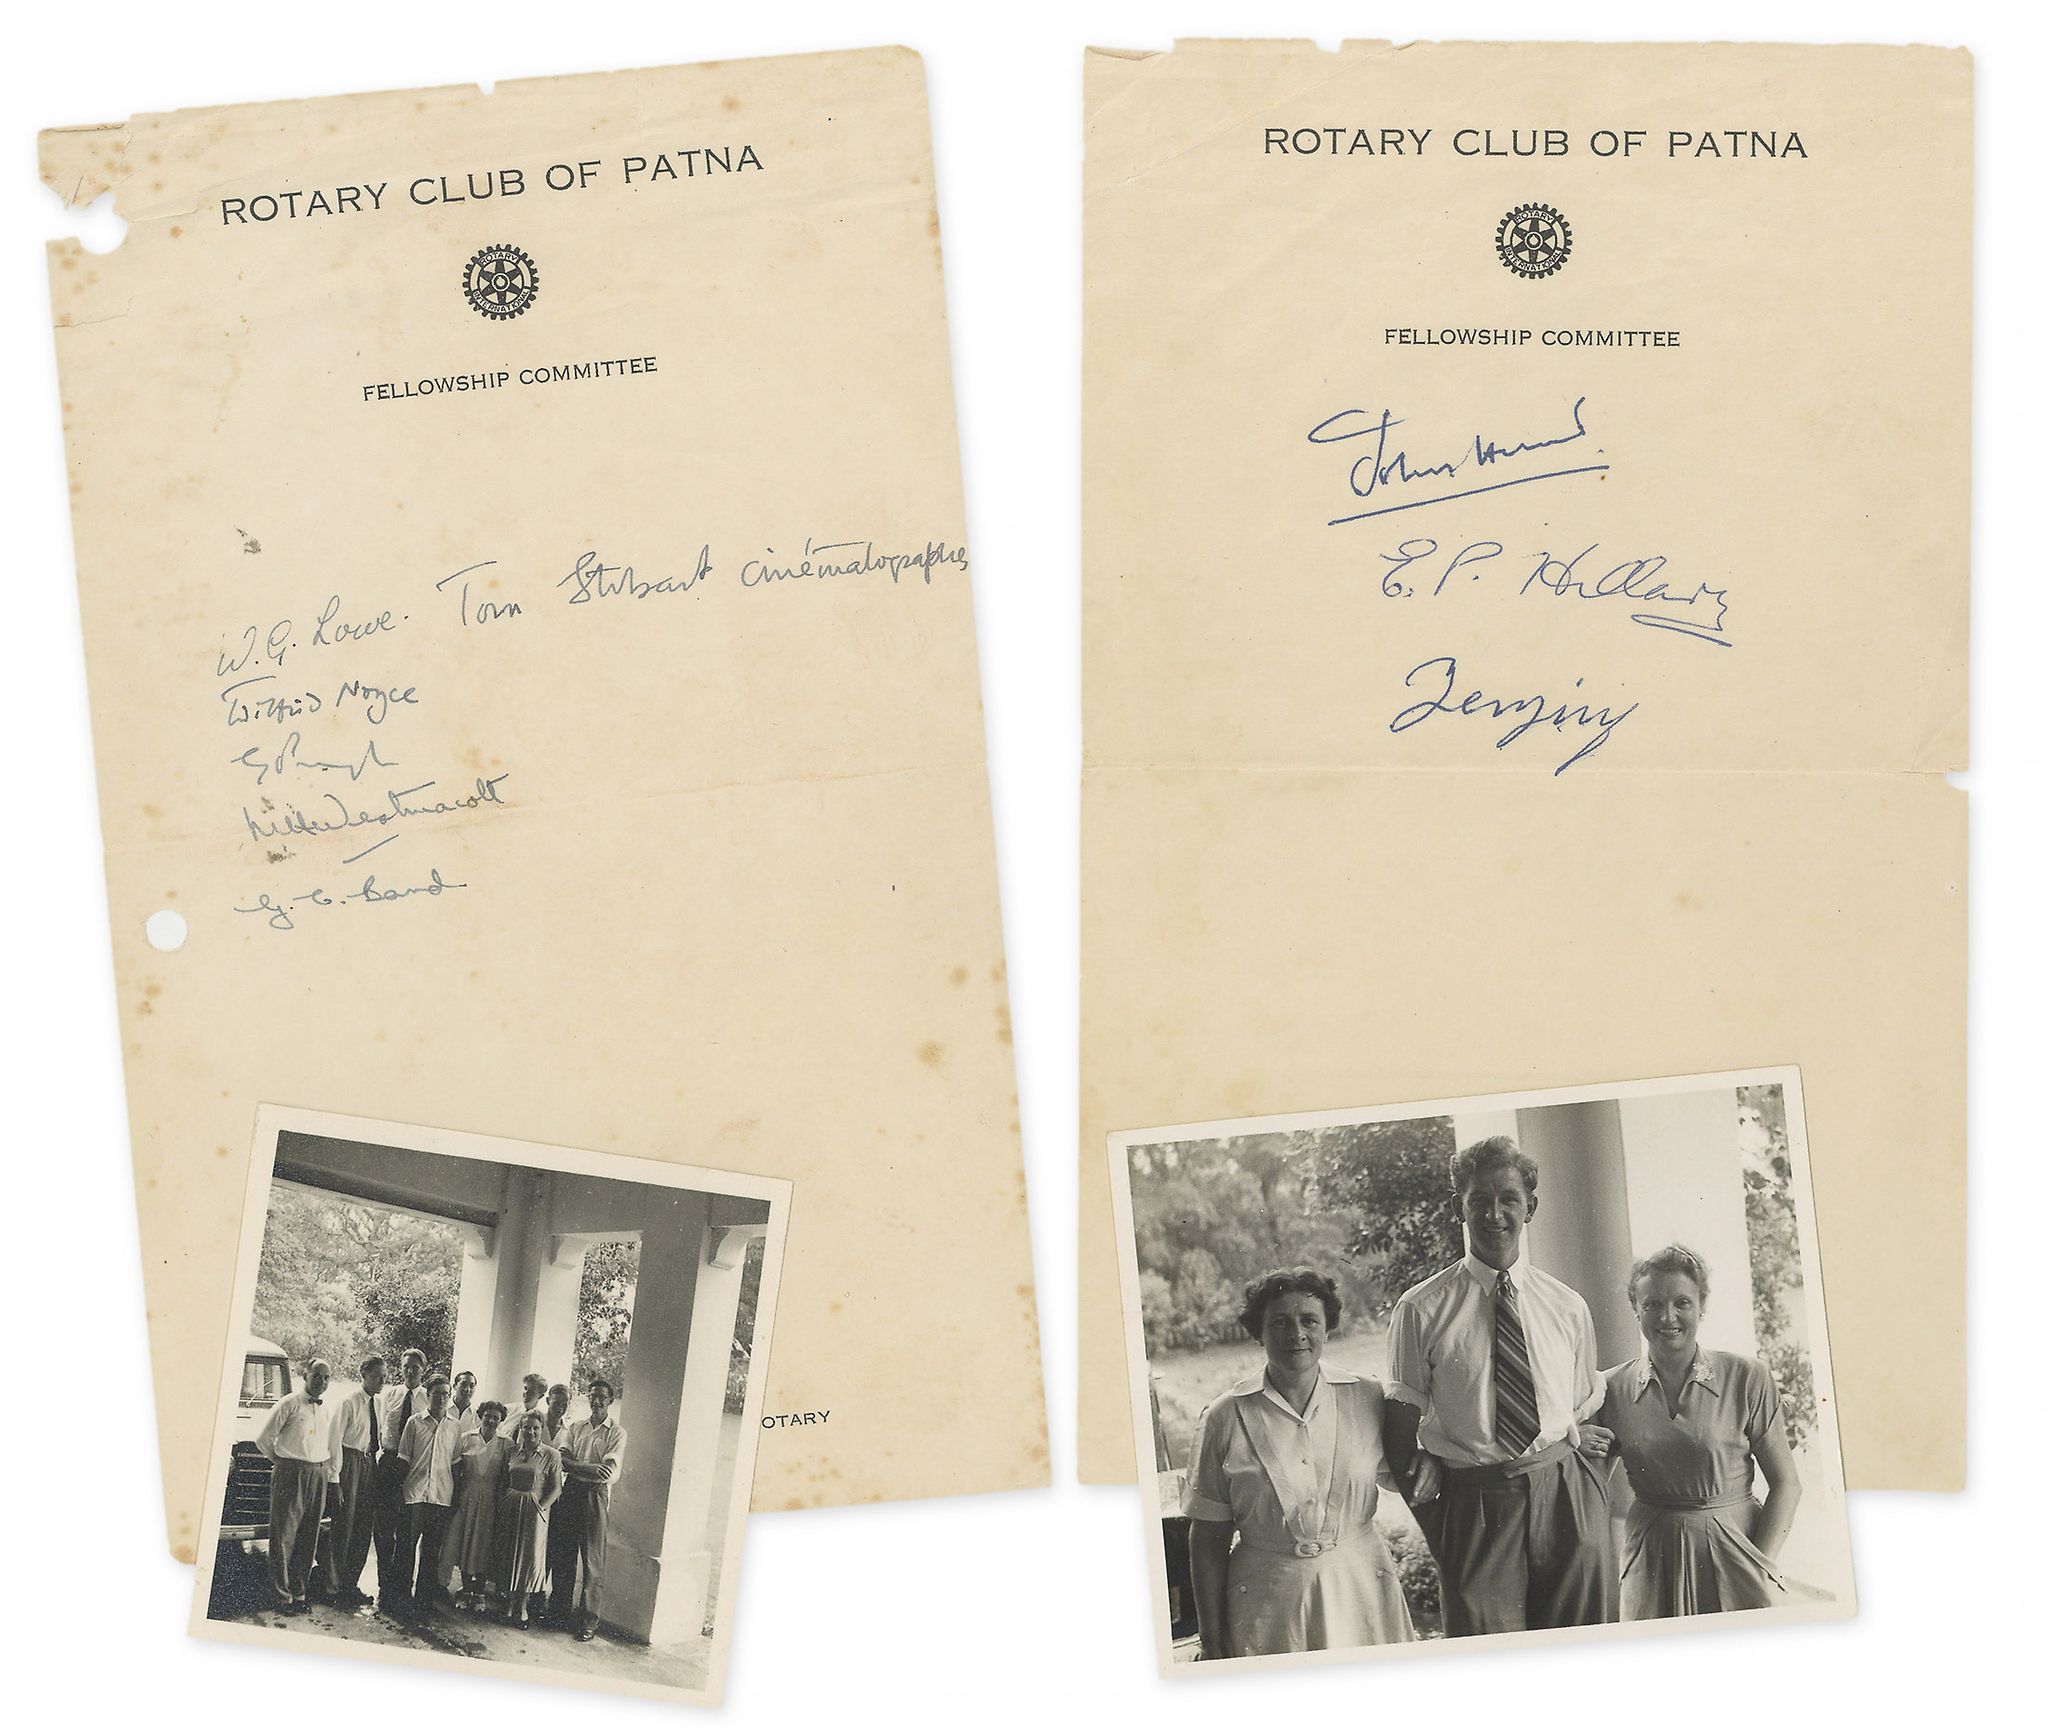 EVEREST EXPEDITION -EDMUND HILLARY, TENZING NORGAY - Two sheets of Rotary Club of Patna headed paper